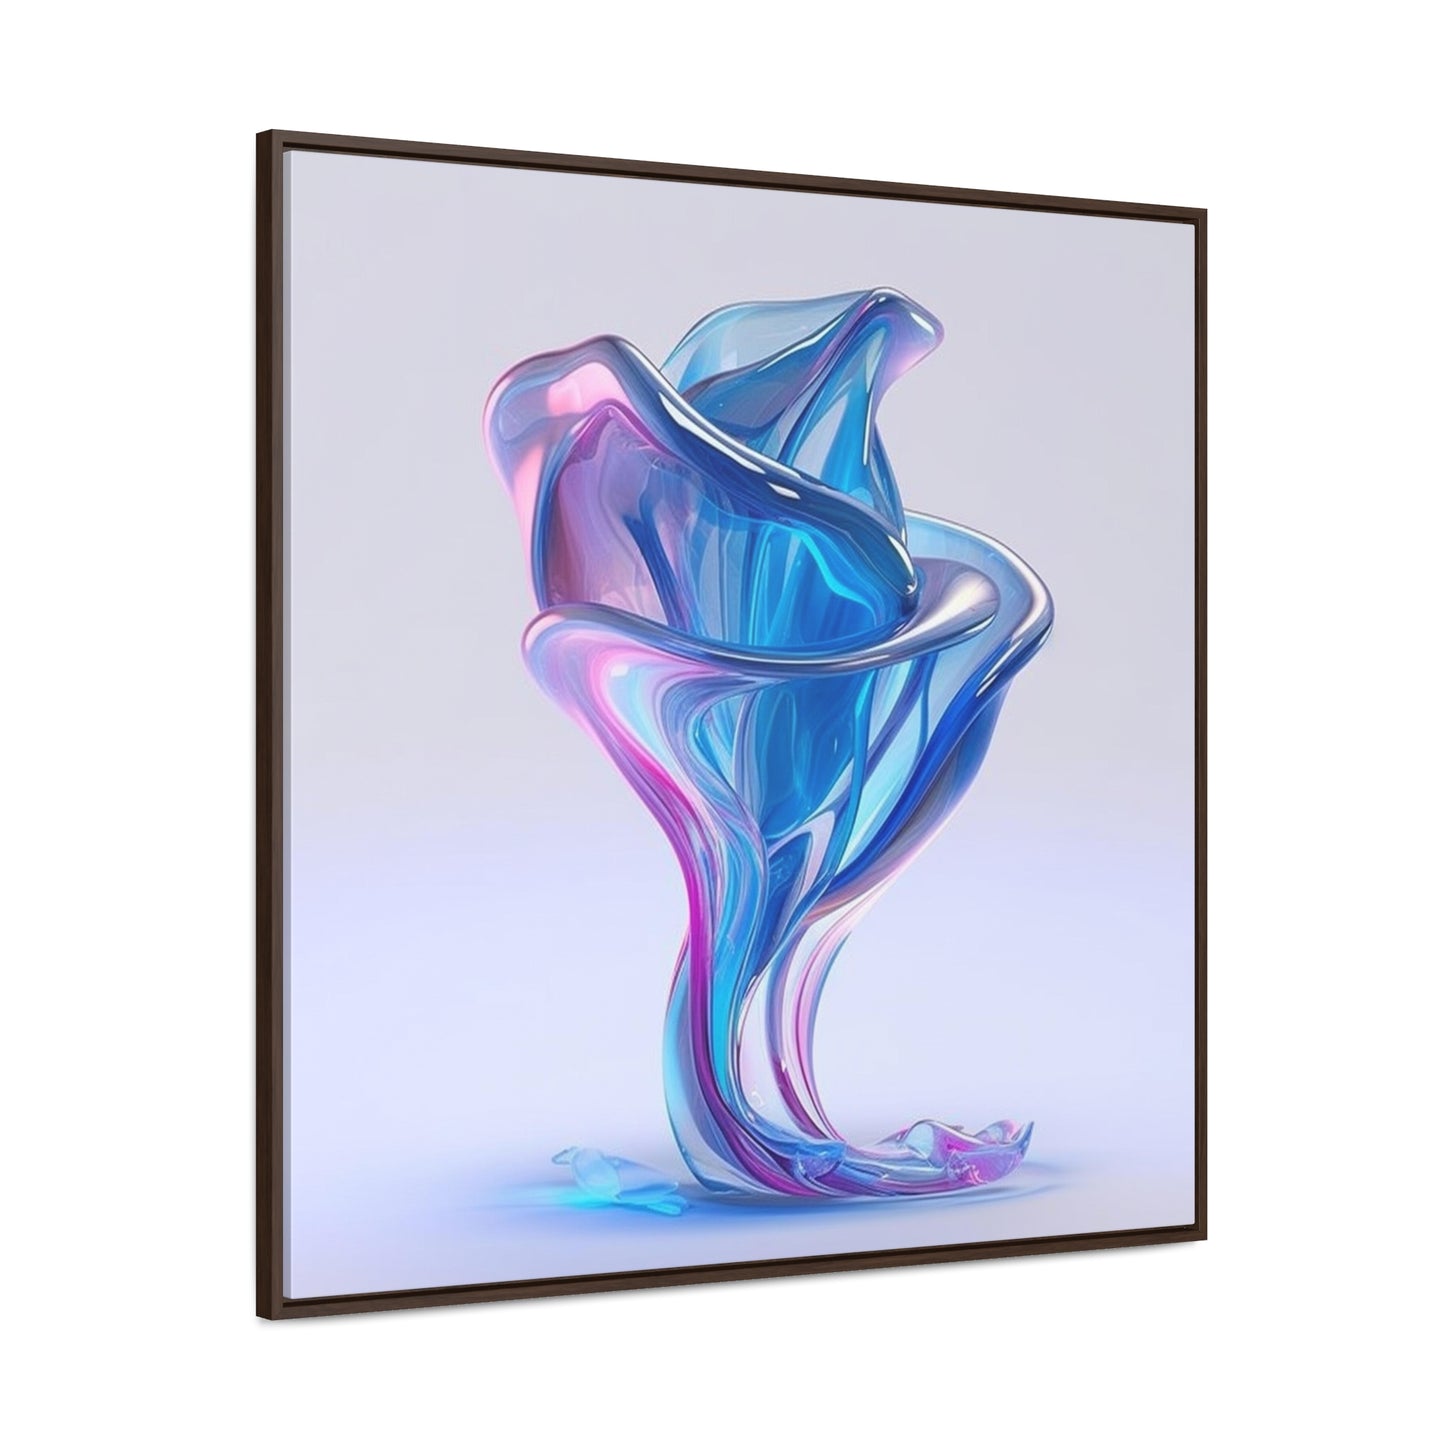 Gallery Canvas Wraps, Square Frame Pink & Blue Tulip Rose 2